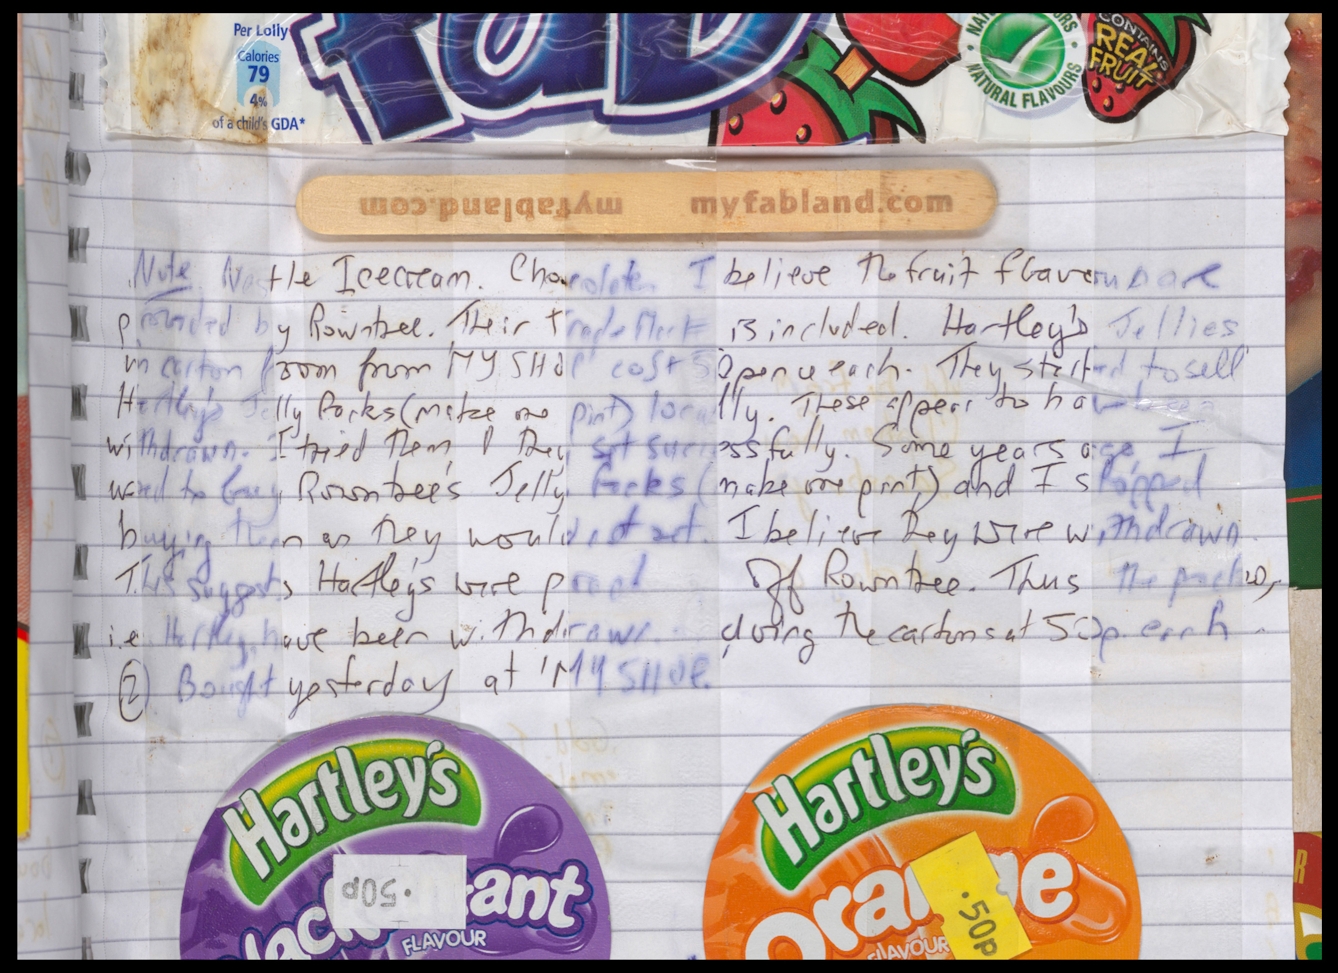 Photograph of a section of a page of a lined paper scrapbook. The page is covered in strips of Sellotape running vertically, which are holding in place an ice lolly wrapper, a wooden lollipop stick, the and lids of 2 jelly pots. In the centre of the image, between the wooden stick and the lids, are 10 lines of handwritten notes which talk about the items that have been stuck in. Where the tape intersected with the writing, the ink has bled into the paper and in some areas faded.